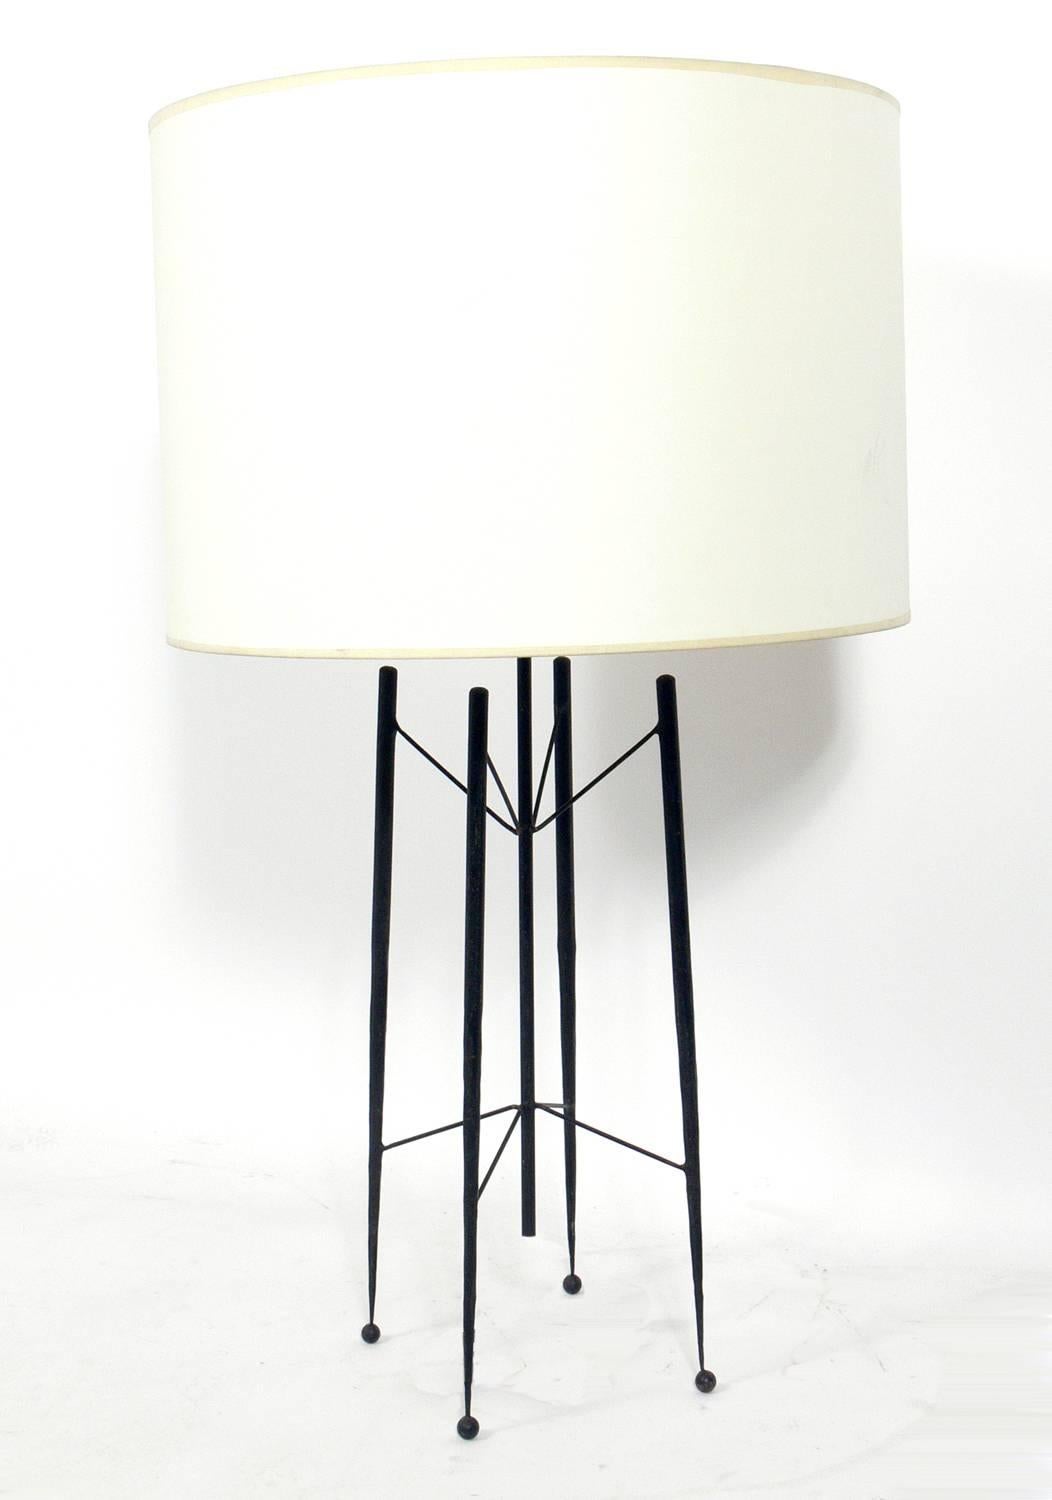 Sculptural California Modern iron lamp and candelabra, designed by Tony Paul for Woodlin-Hall, American, circa 1950s. We have never seen this lamp offered for sale before. It came out of the same estate as the candelabra. The lamp measures 33.5